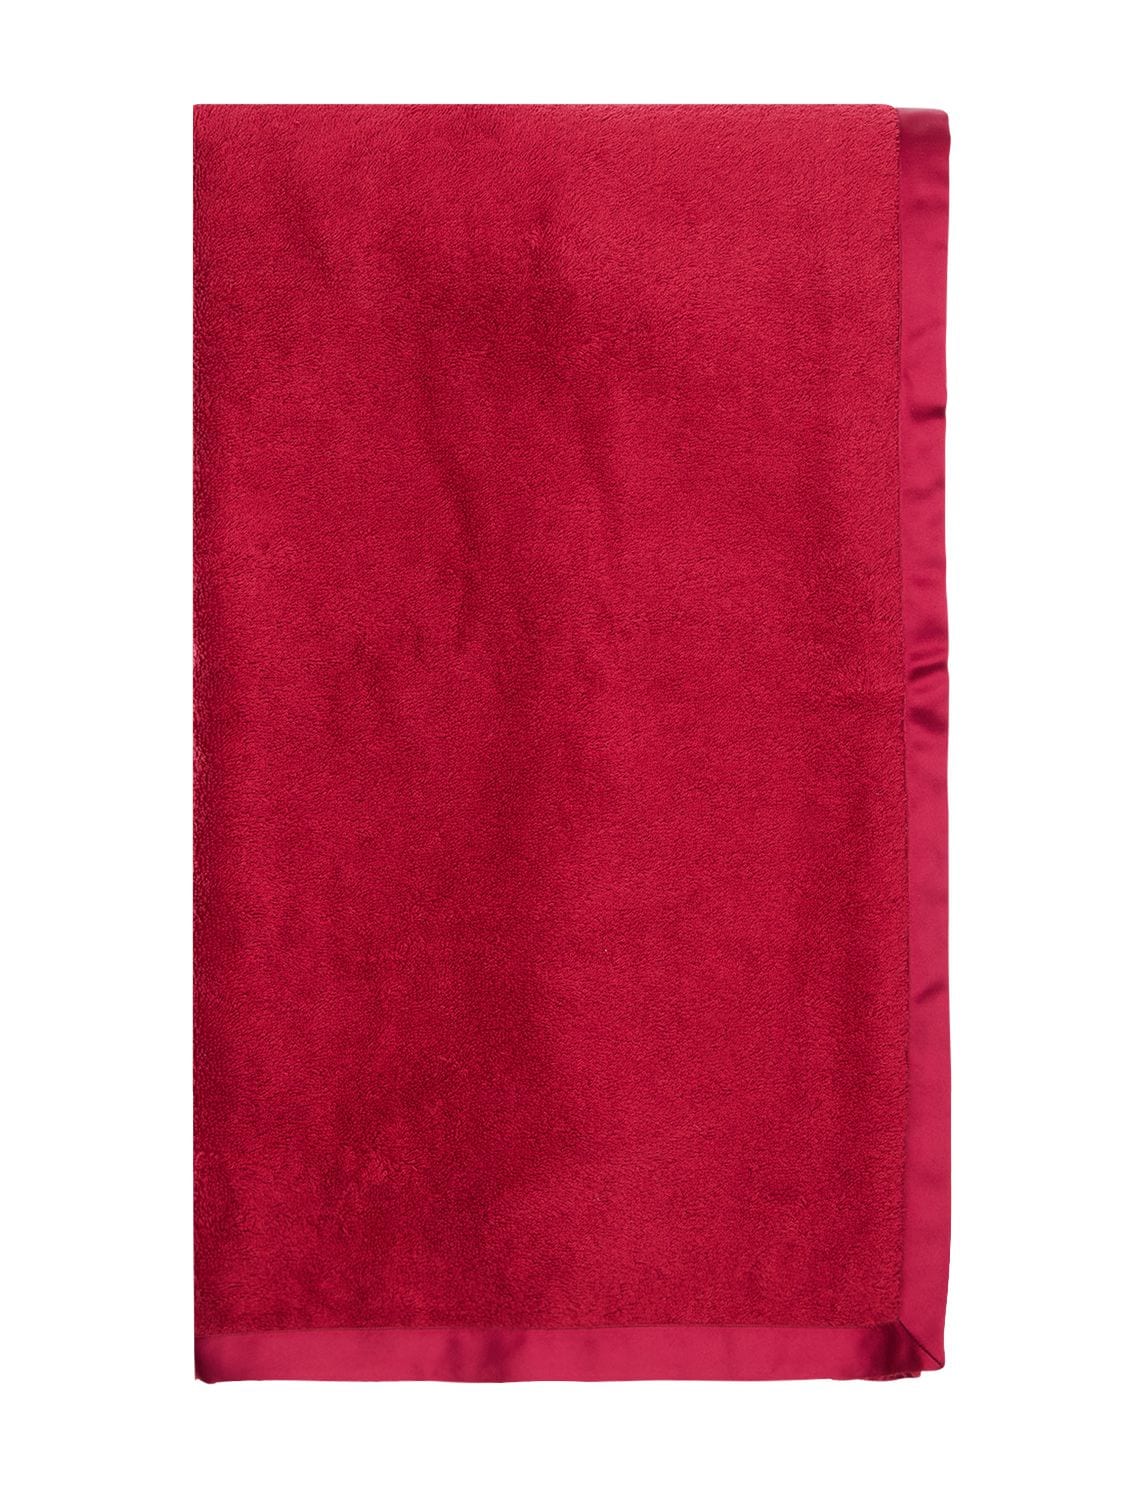 Alessandro Di Marco Cotton Terrycloth Bath Towel In Red